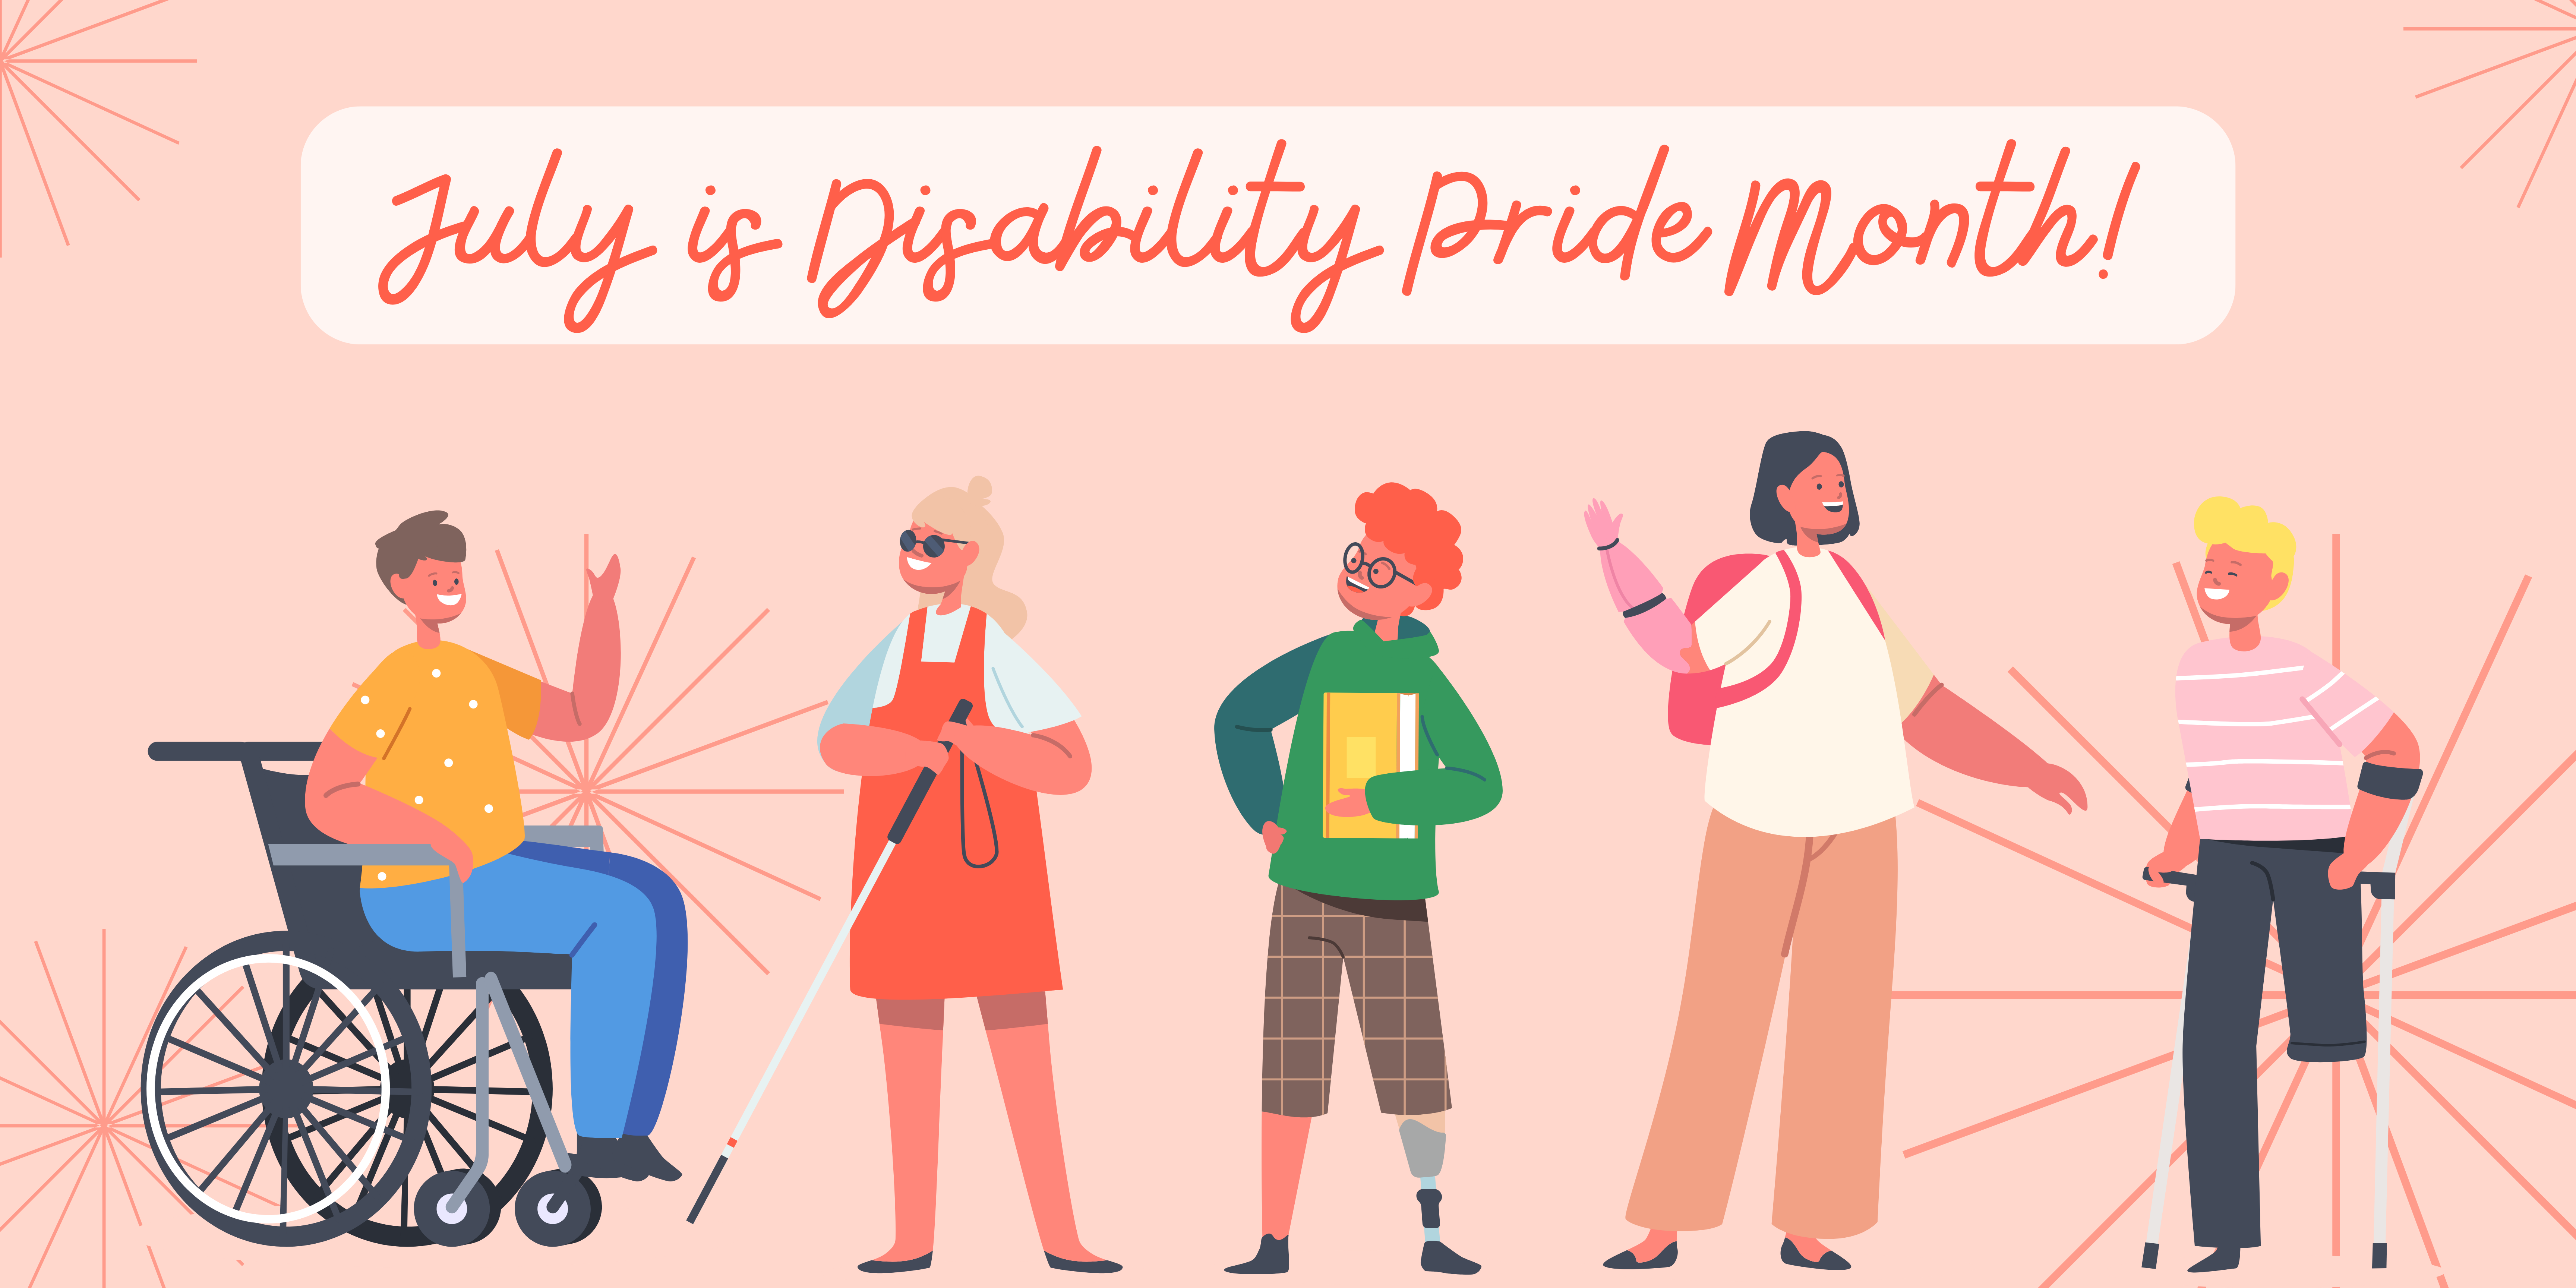  "July is Disability Pride Month" banner with a pink background. Five individuals with diverse physical disabilities stand together.